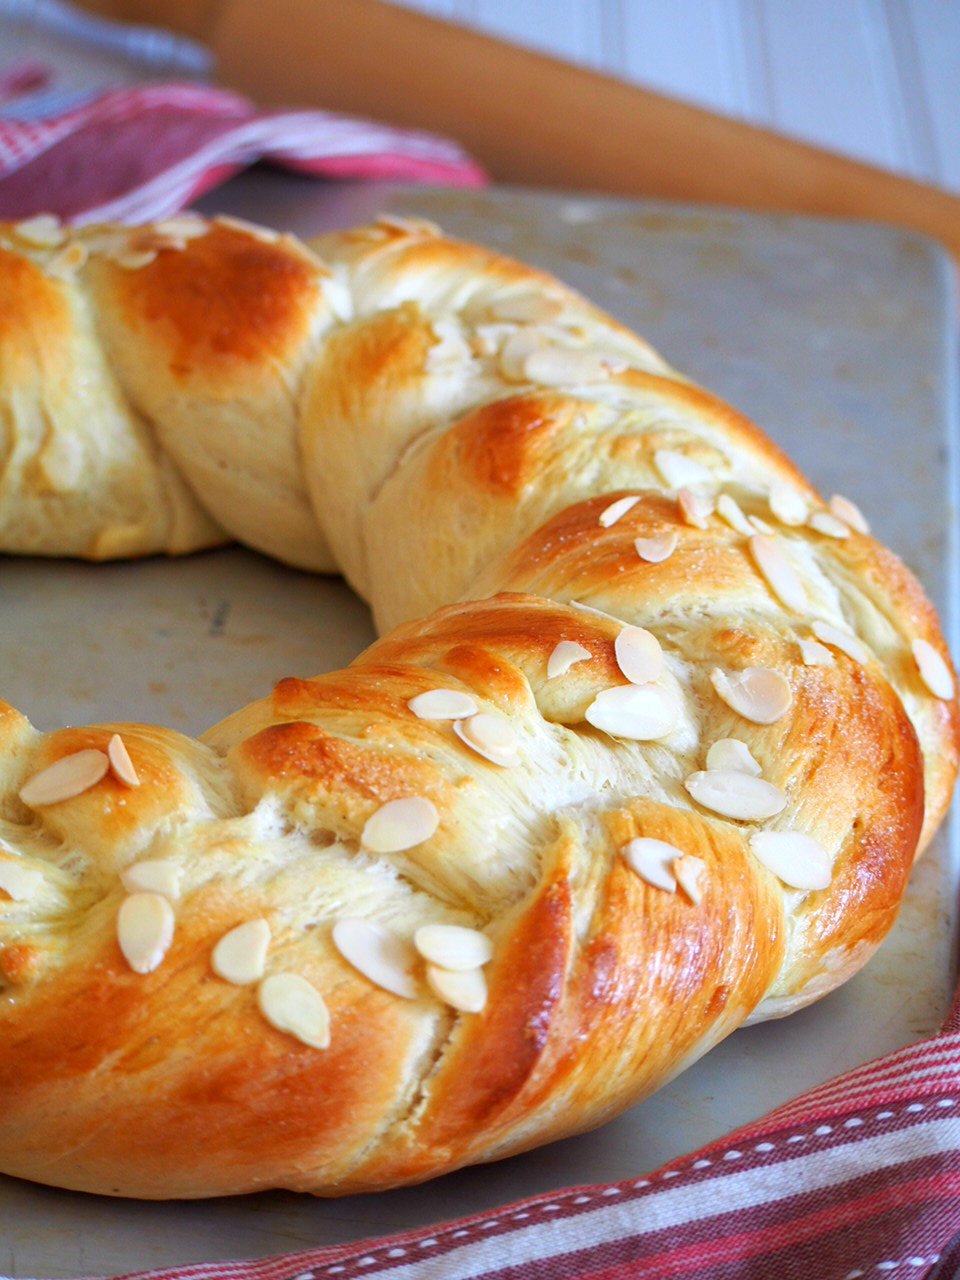 Finnish Pulla is a celebration bread braided beautifully like a wreath. It gets its nice flavor from the cardamom and it is adorned with crunchy almonds as finishing on top.